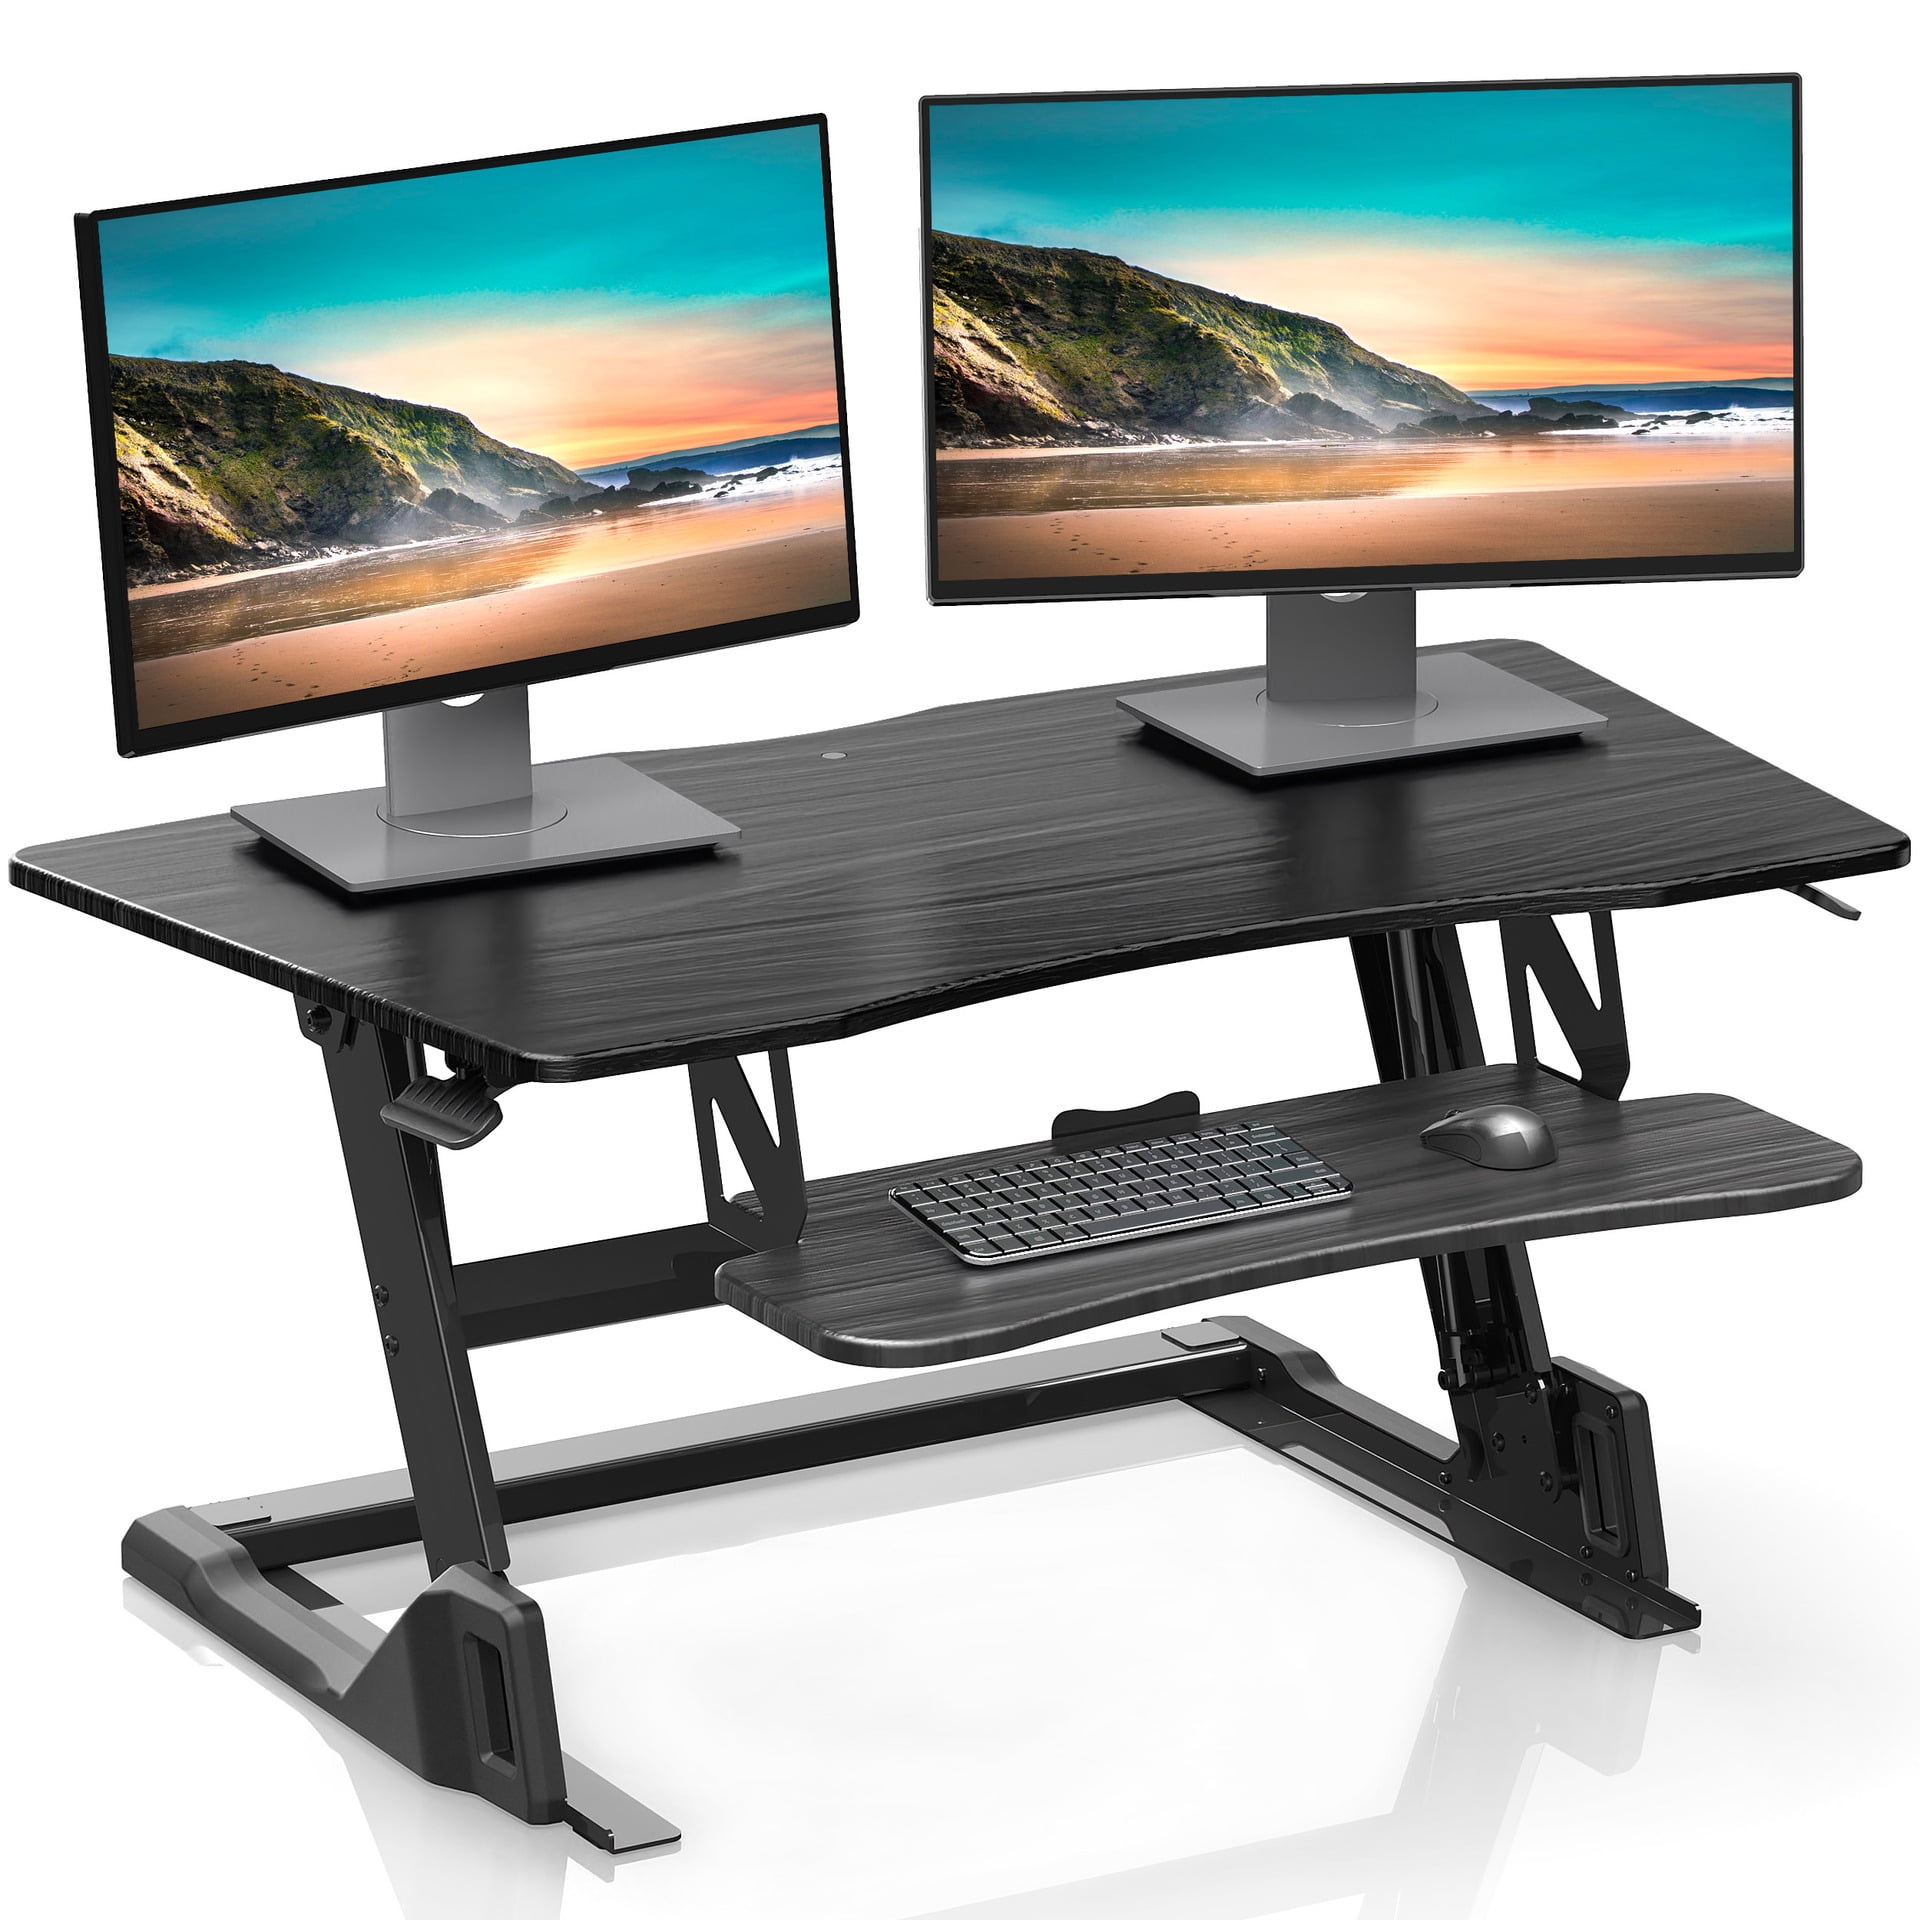 Easy Operation and Preassembled Suptek Height Adjustable Standing Desk Riser Max Height 19.3 idesk001 35 Wide Work Desk Fits Two Monitors 